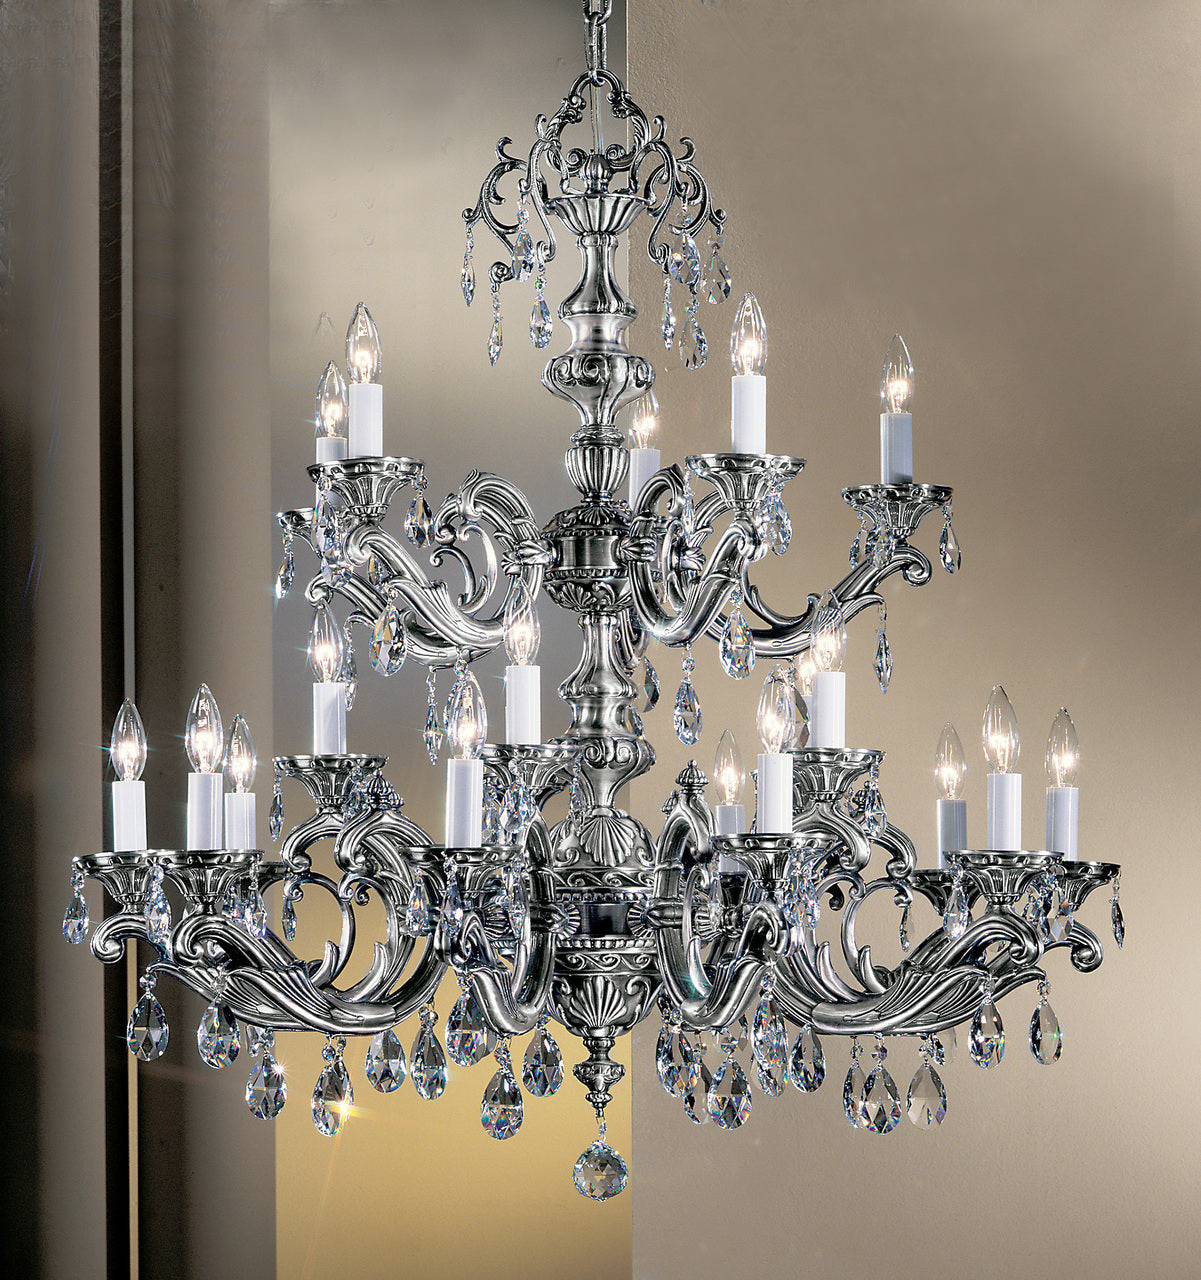 Classic Lighting 57220 MS C Princeton II Crystal Chandelier in Millennium Silver (Imported from Spain)